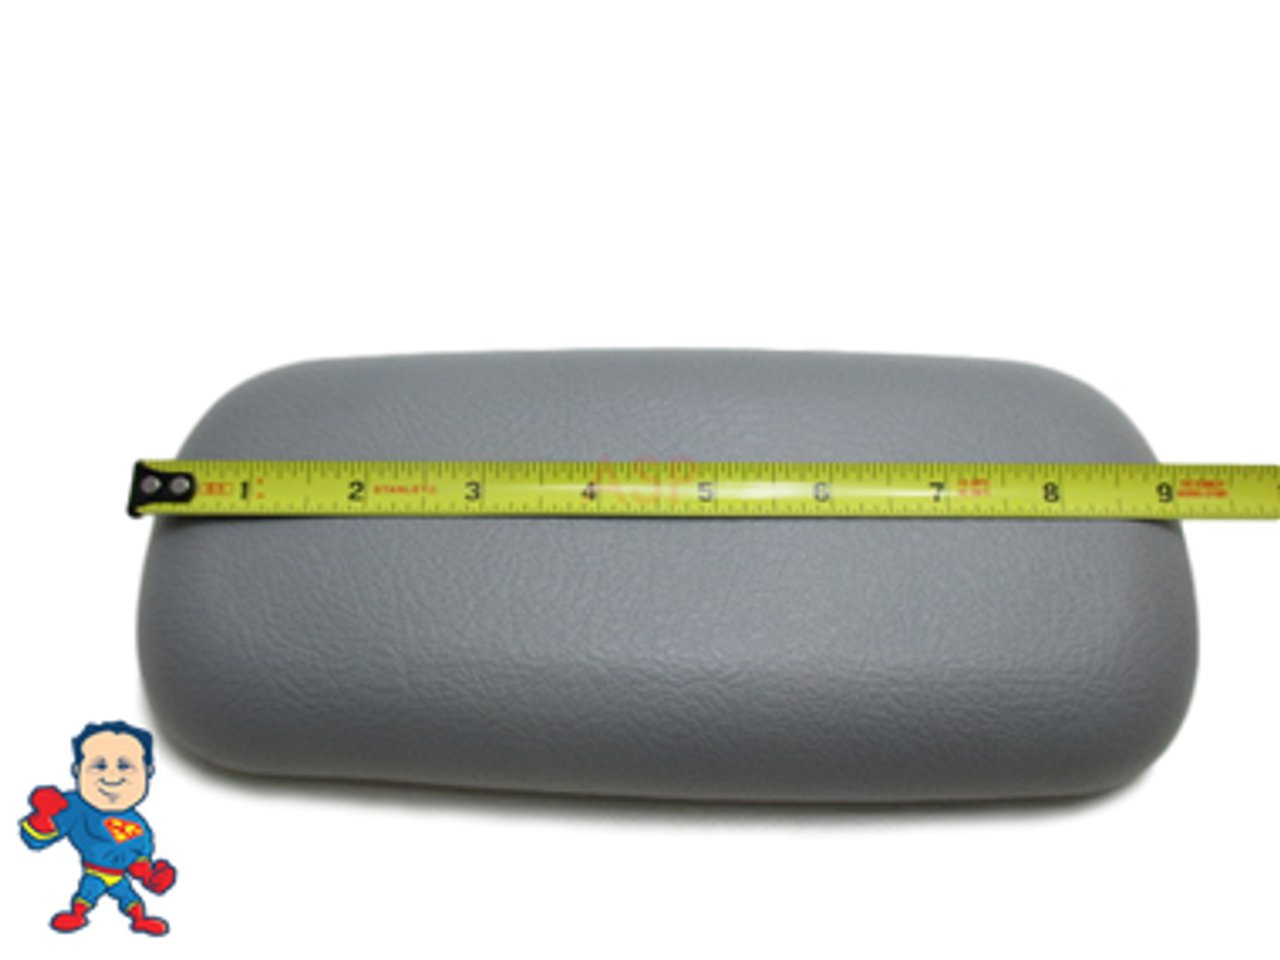 Gray Neck Pillow, 9 1/2" x 4 1/4",  3-3/4" Tabs, Infinity, Raindance, Four Winds, Premier, Serenity, Dimension One